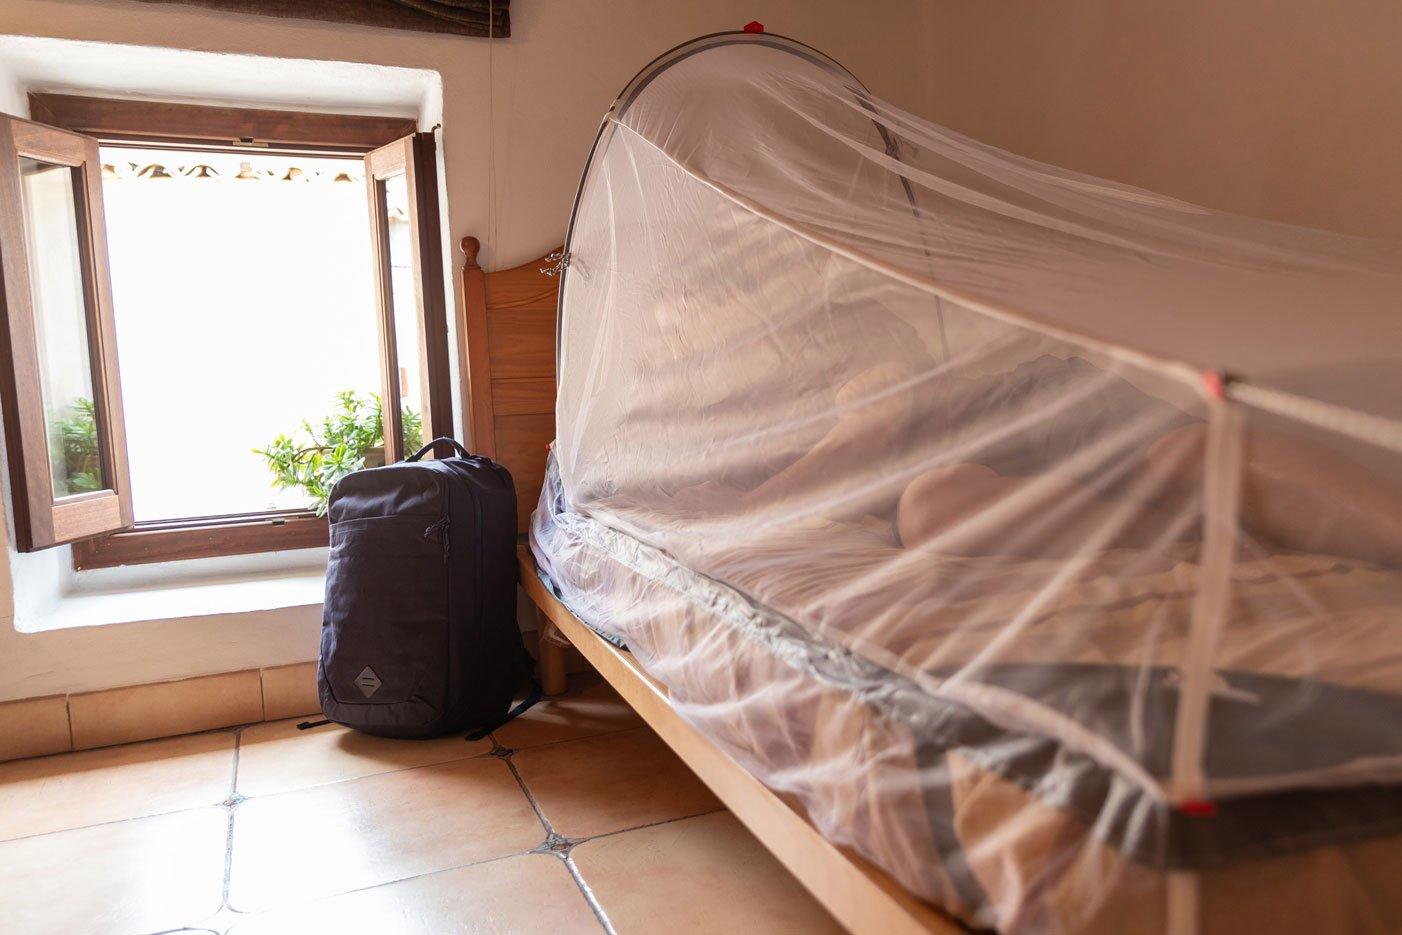 Lifesystems Arc Self Supporting Mosquito Net Review